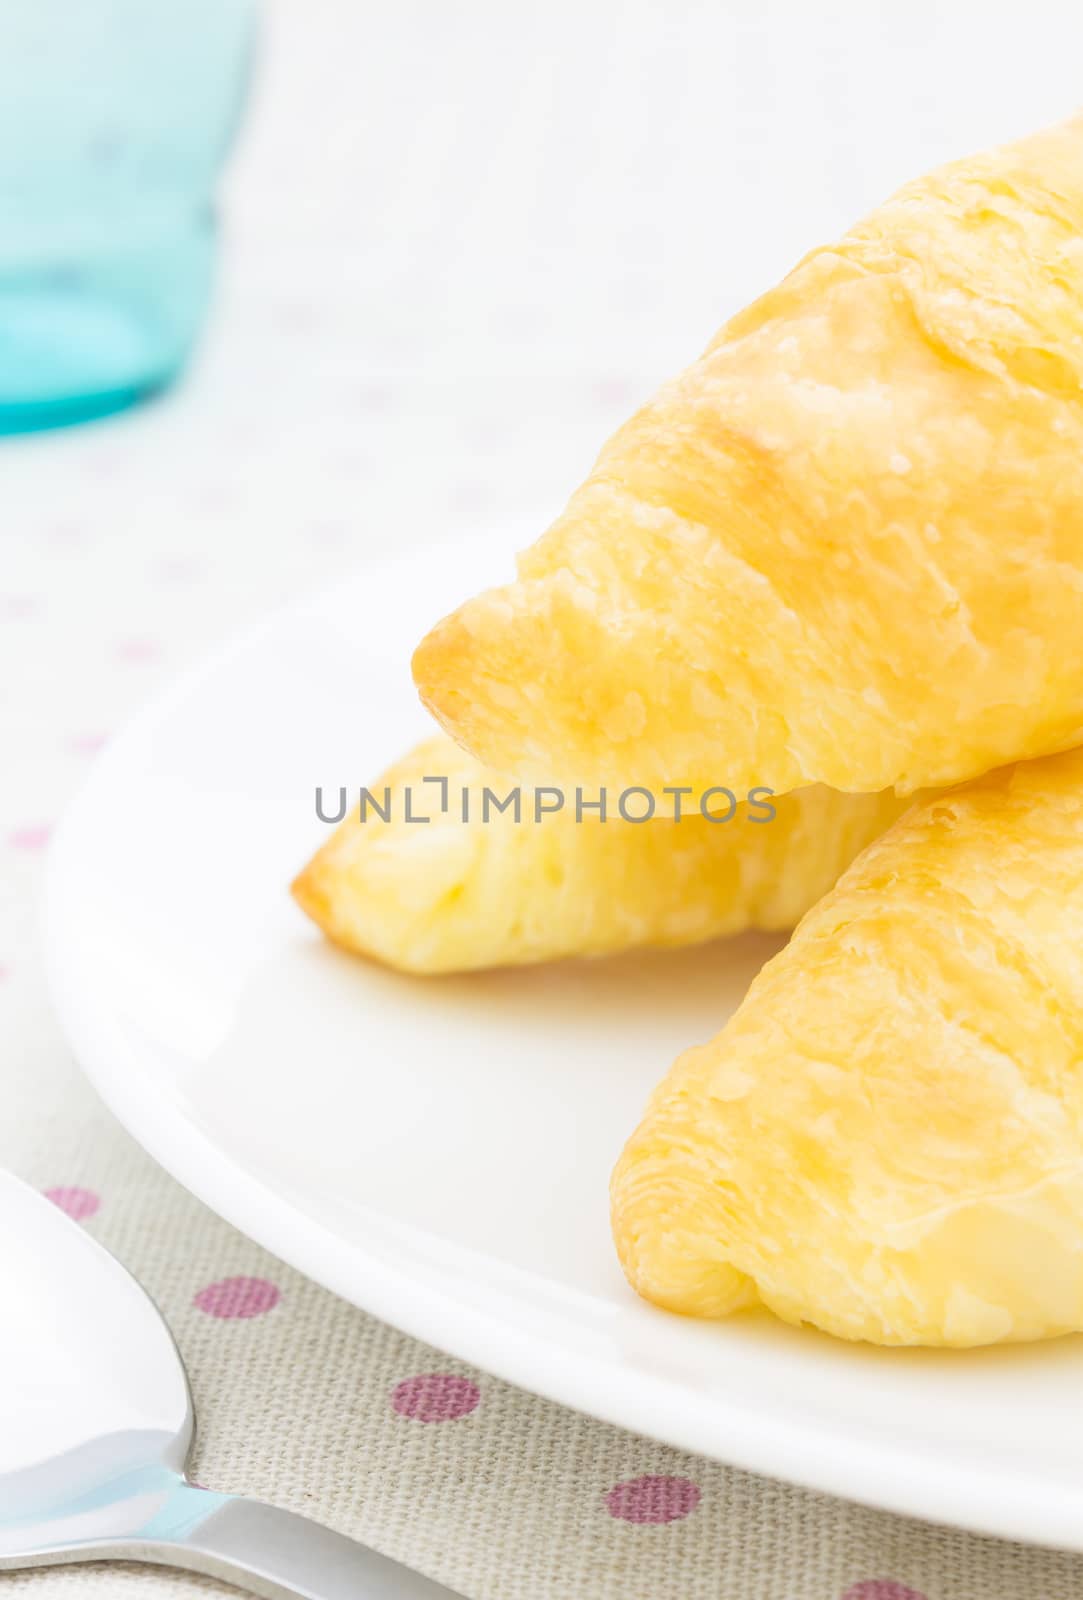 Croissant or bread or bakeray on white dish on pink point placemat with spoon and glass close up view